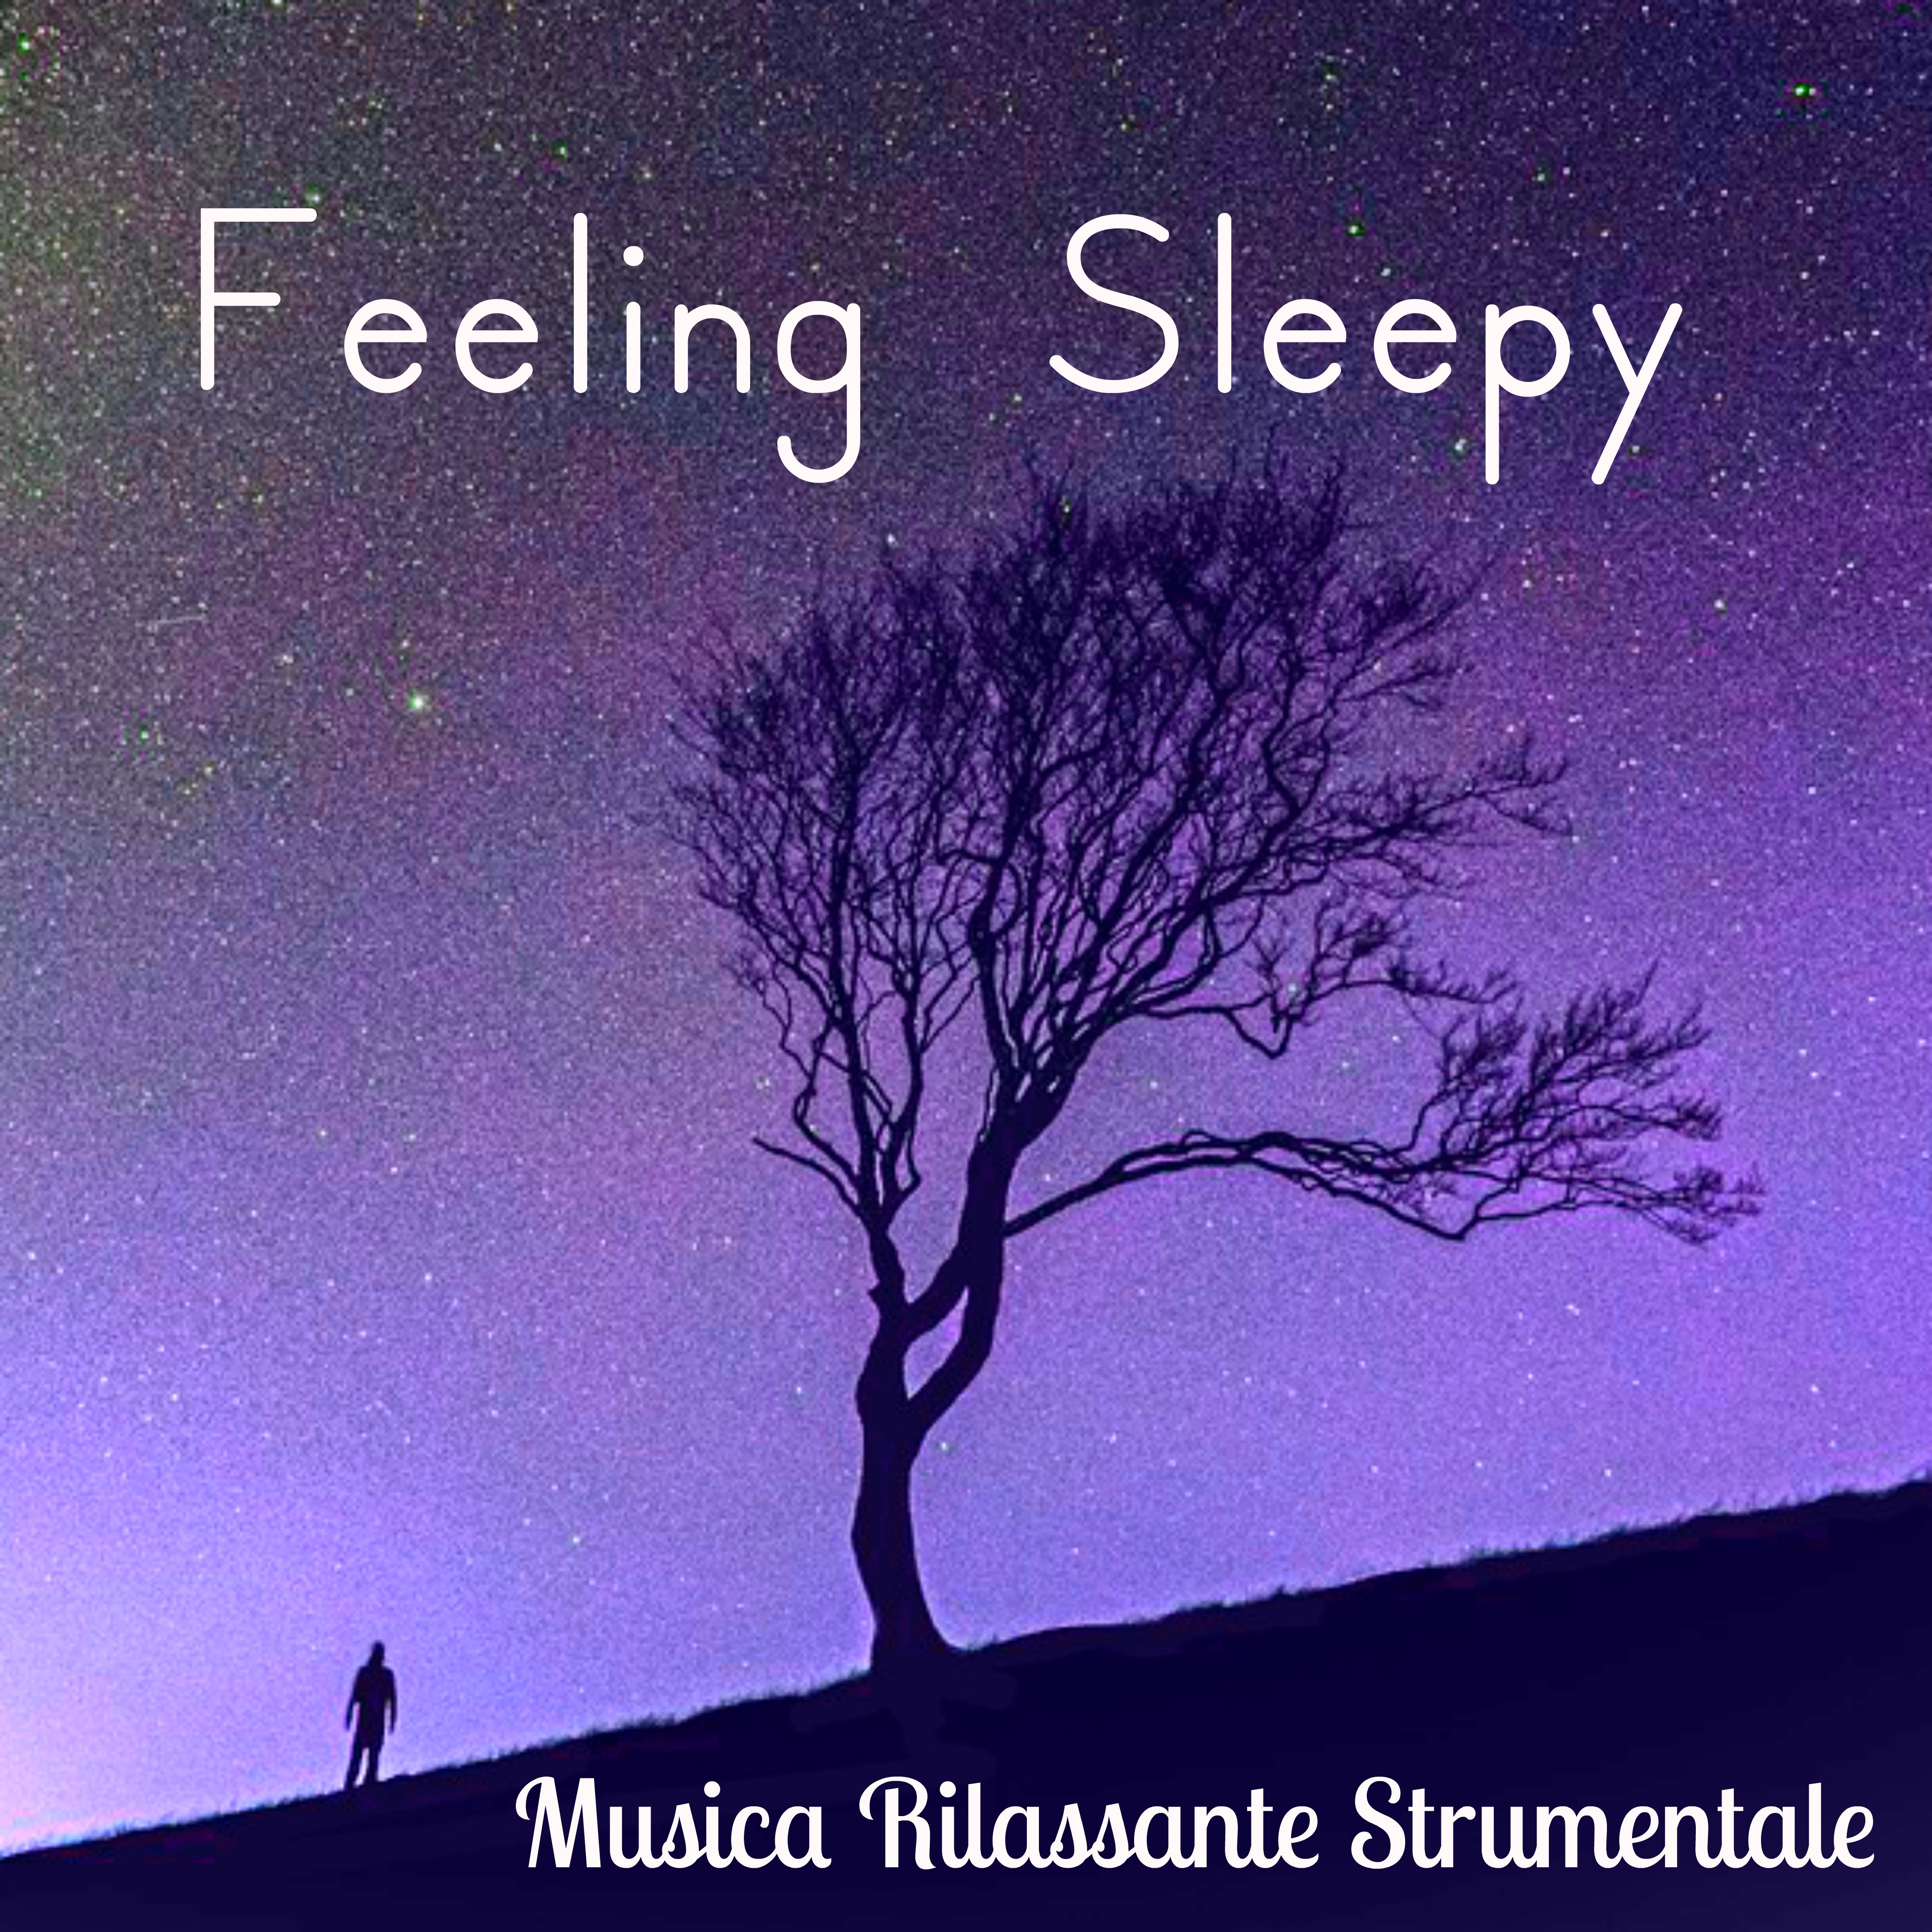 Rest with New Age Sounds – Sleep & Relax, Calming Waves Peaceful Mind, Stress Free